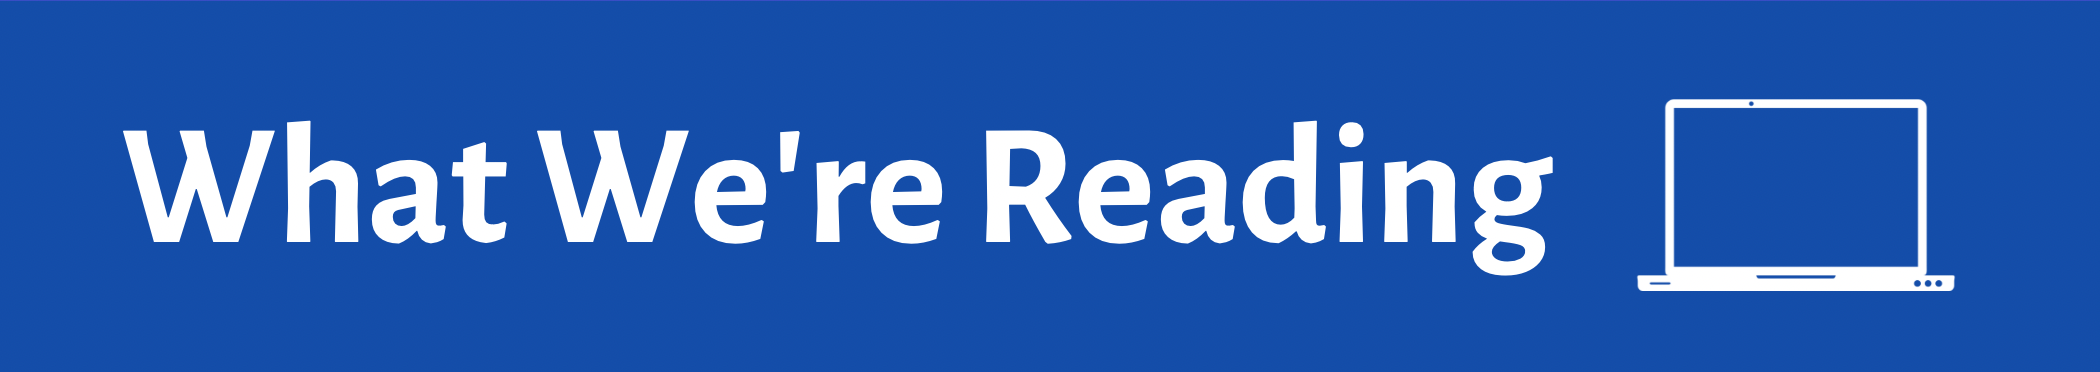 what are we reading banner